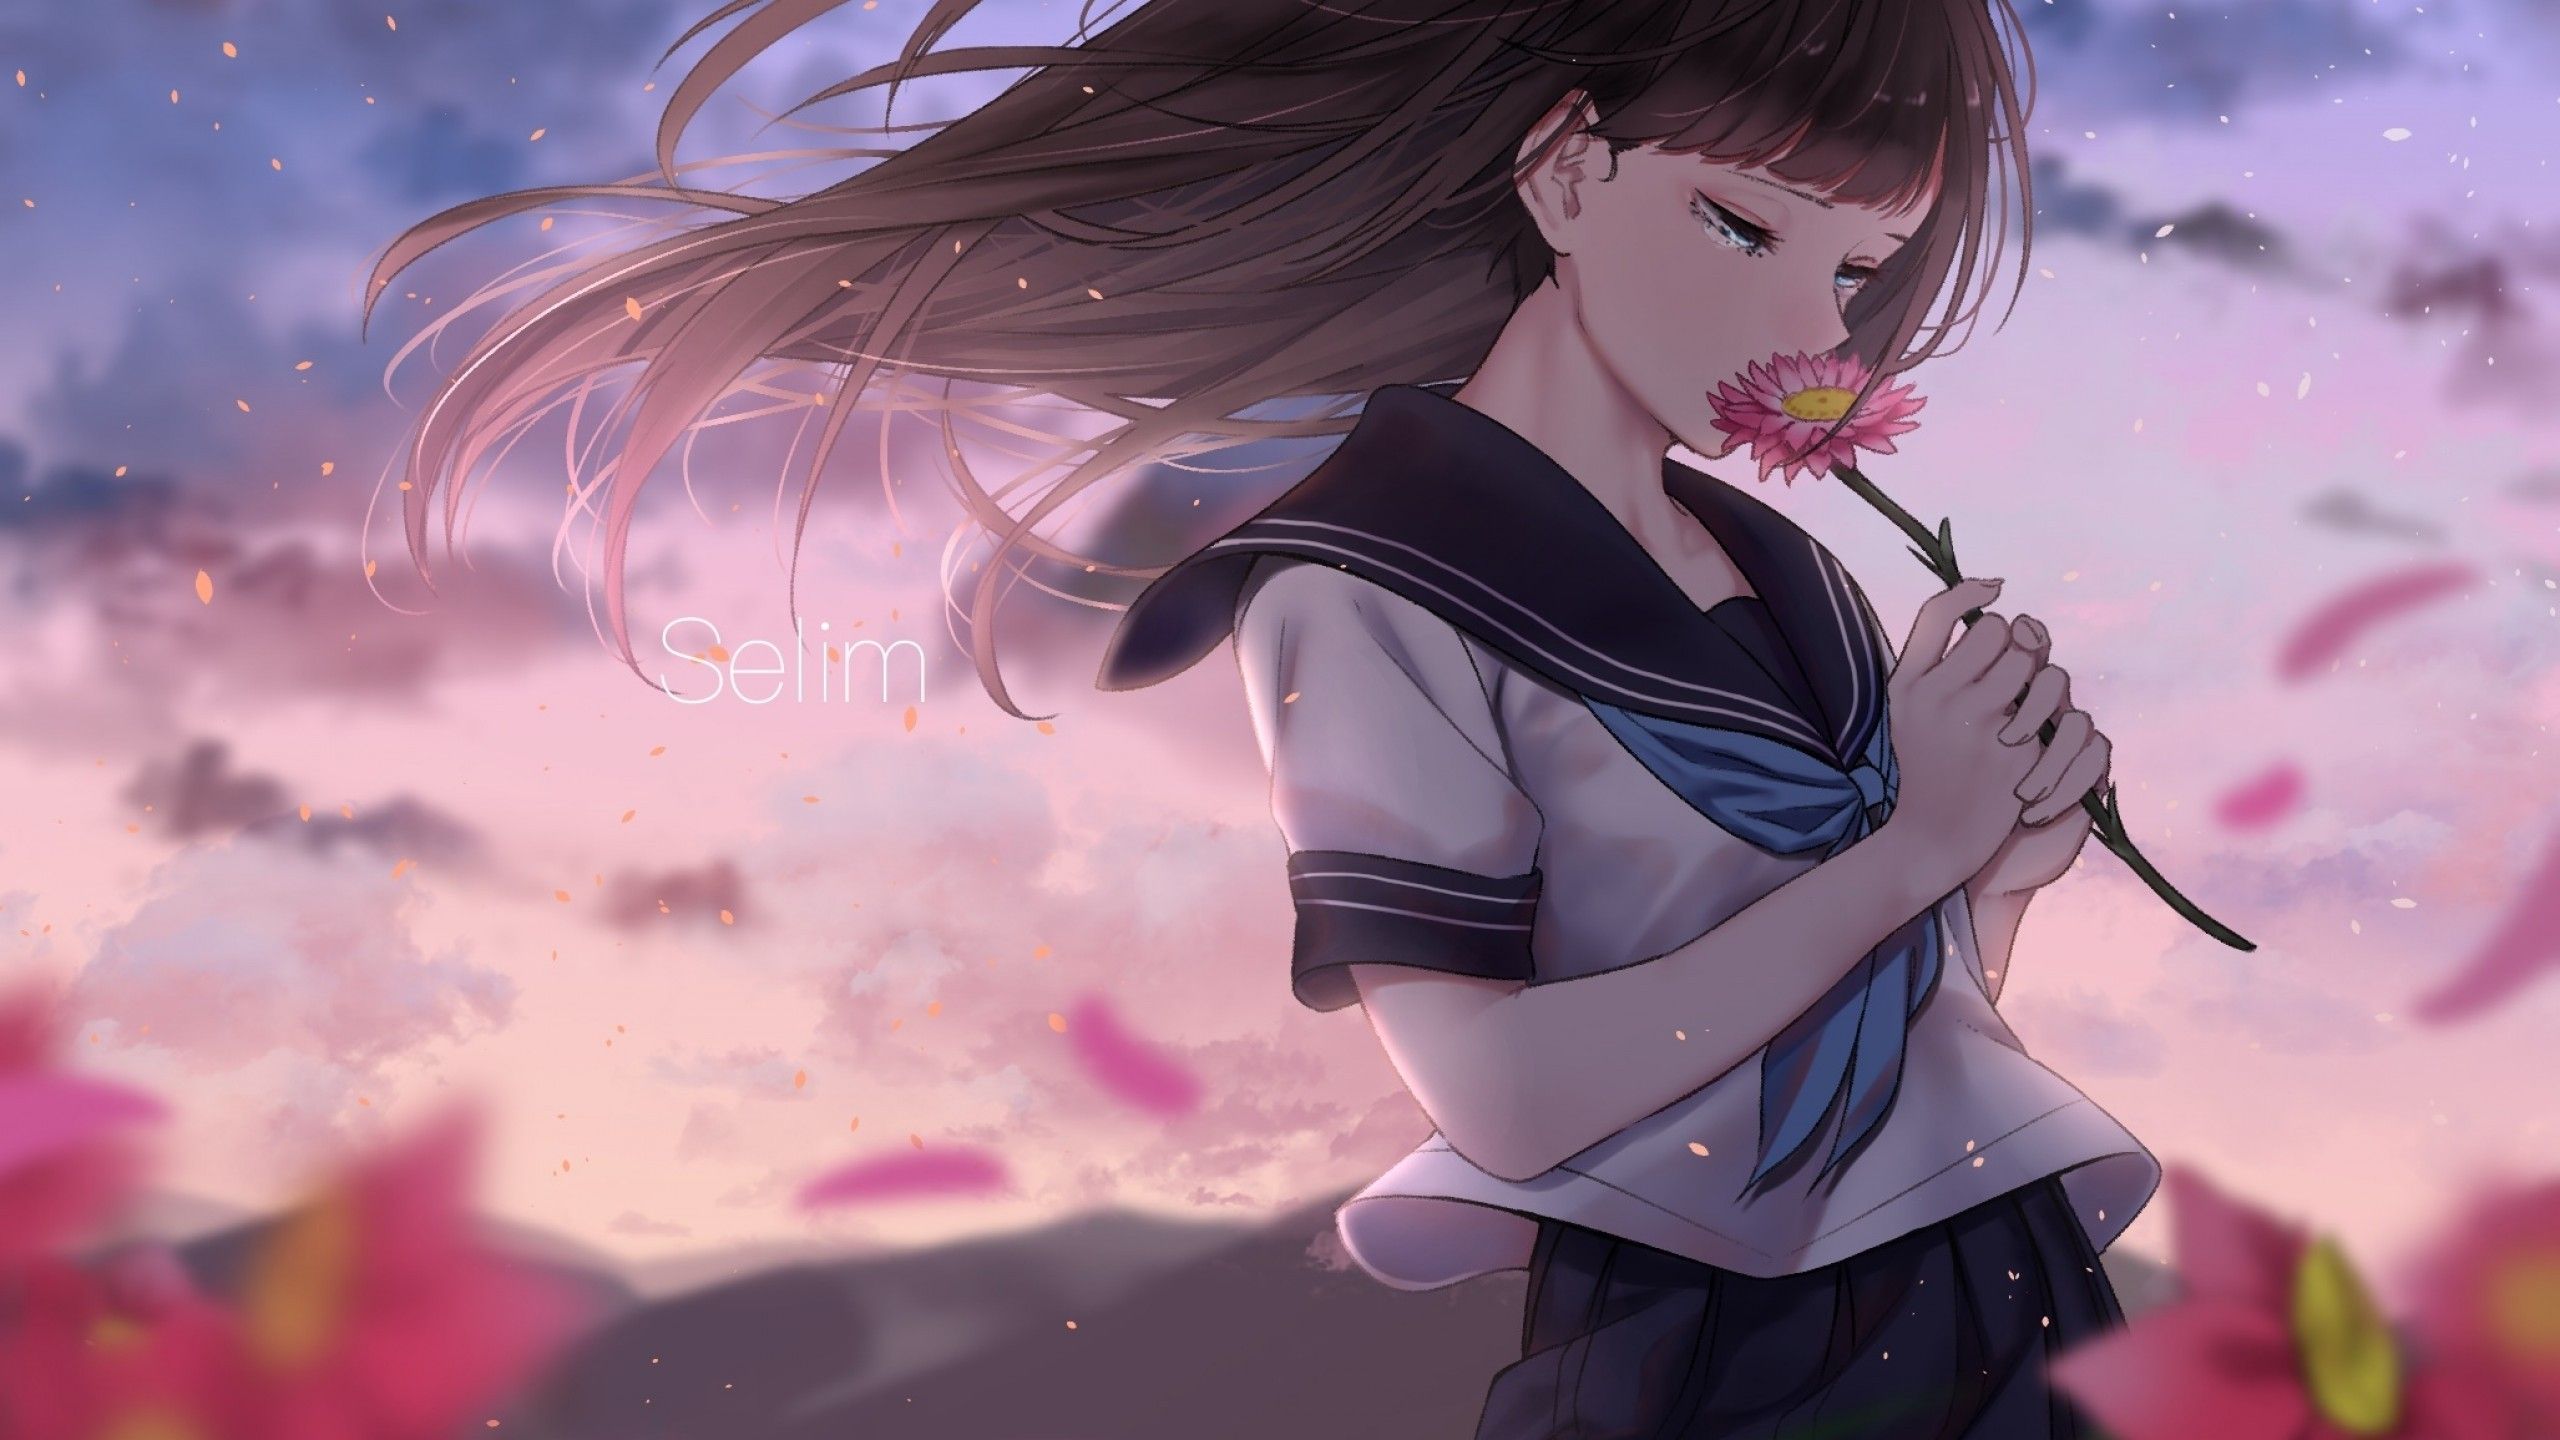 Download 2560x1440 Anime Girl, Teary Eyes, Sad Expression, Wind